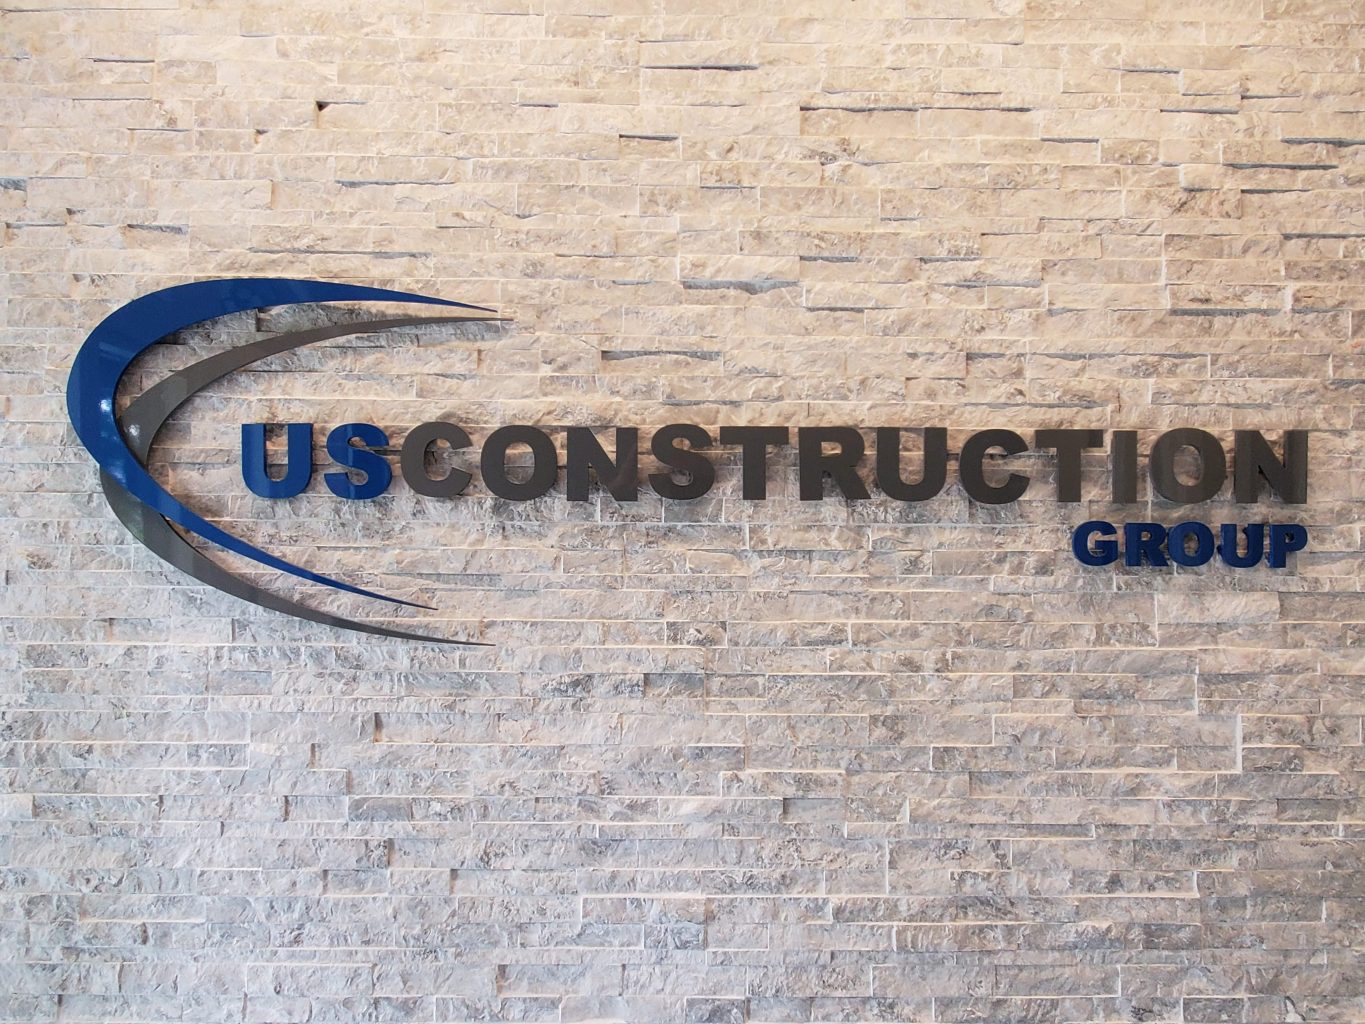 Our team starts with Tony Onesti at the helm of the company - US Construction Group